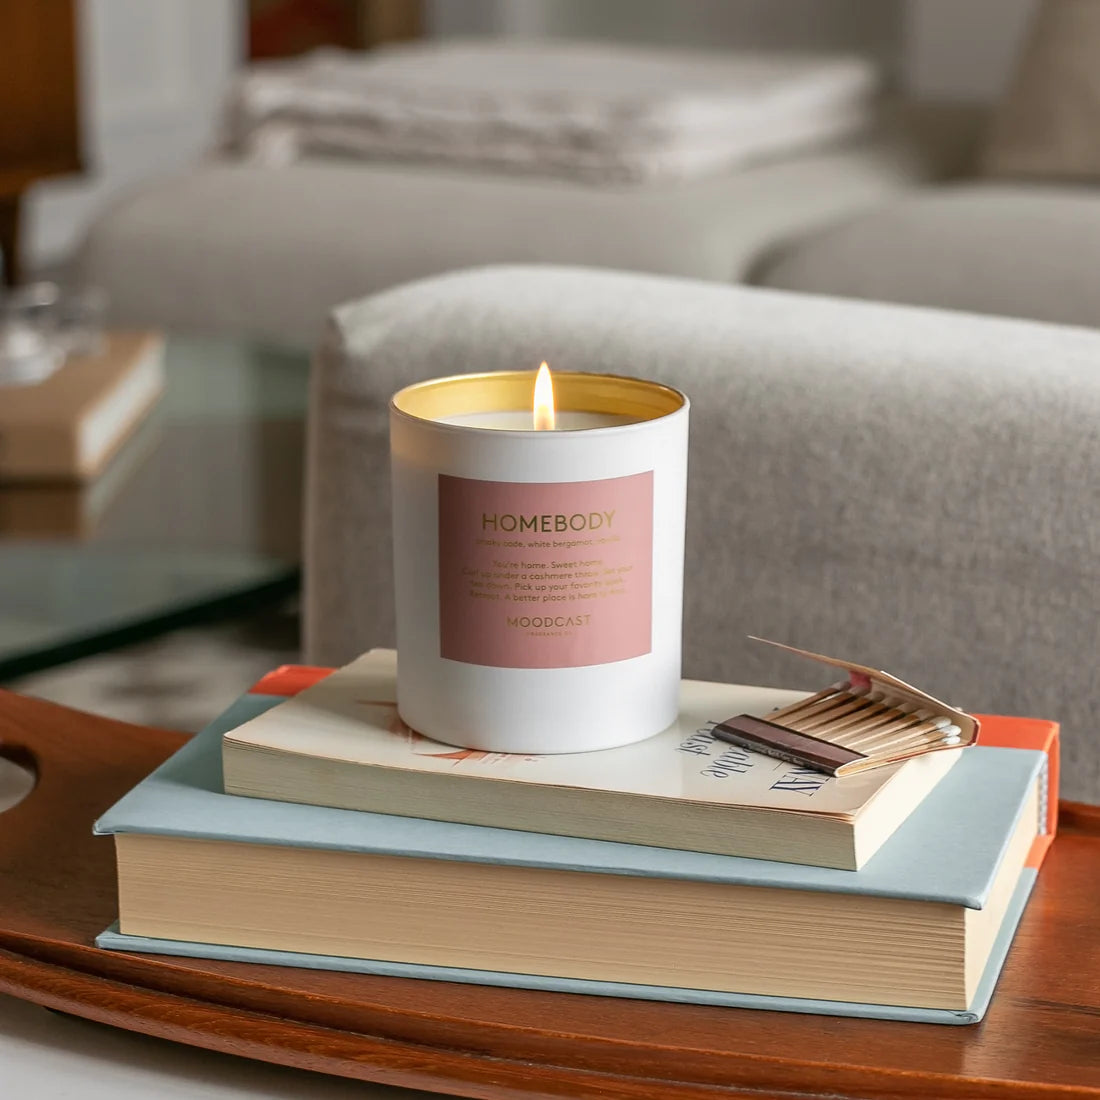 Moodcast Homebody Candle